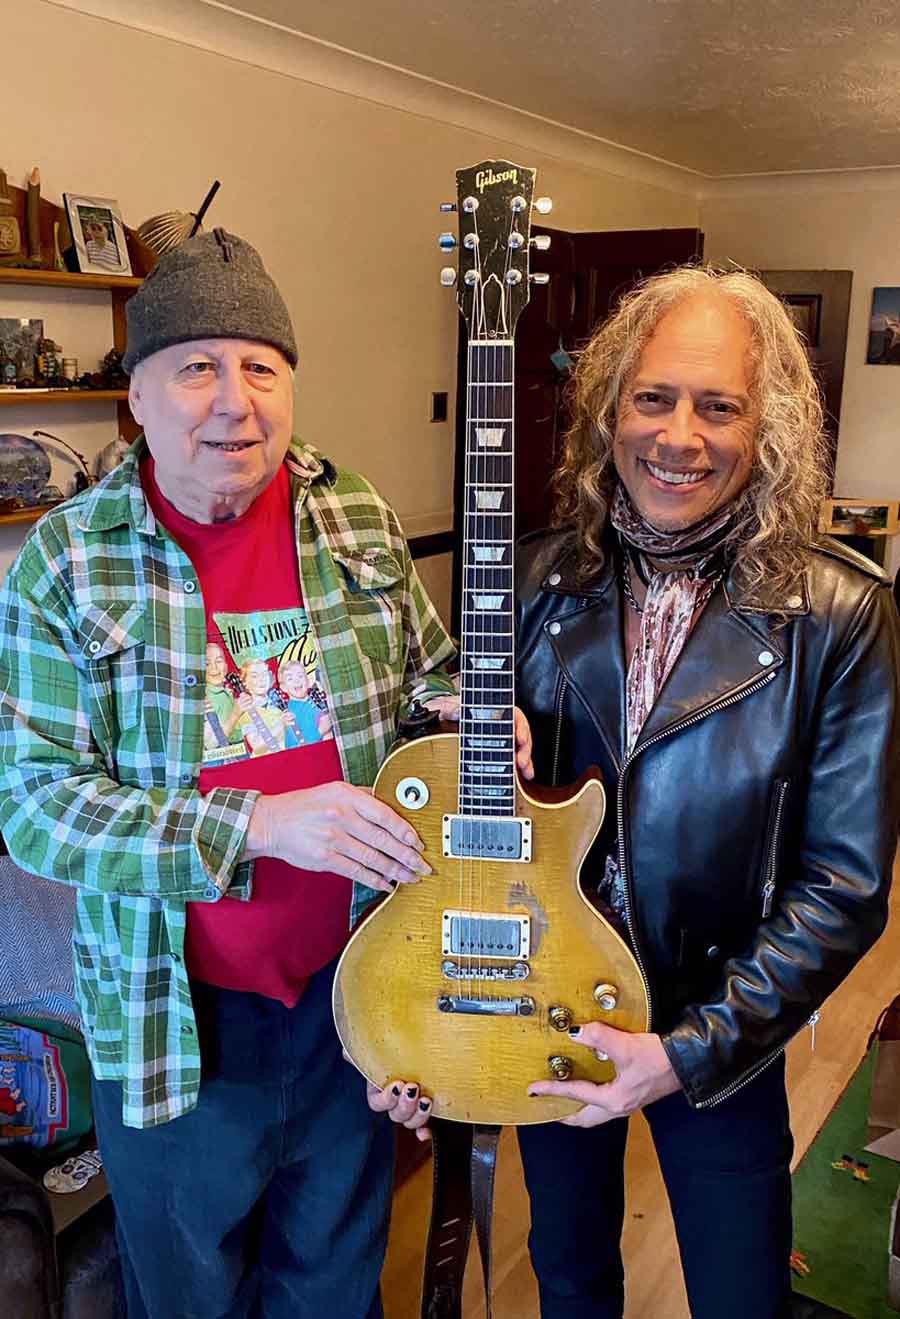 Hammett and Green with guitar